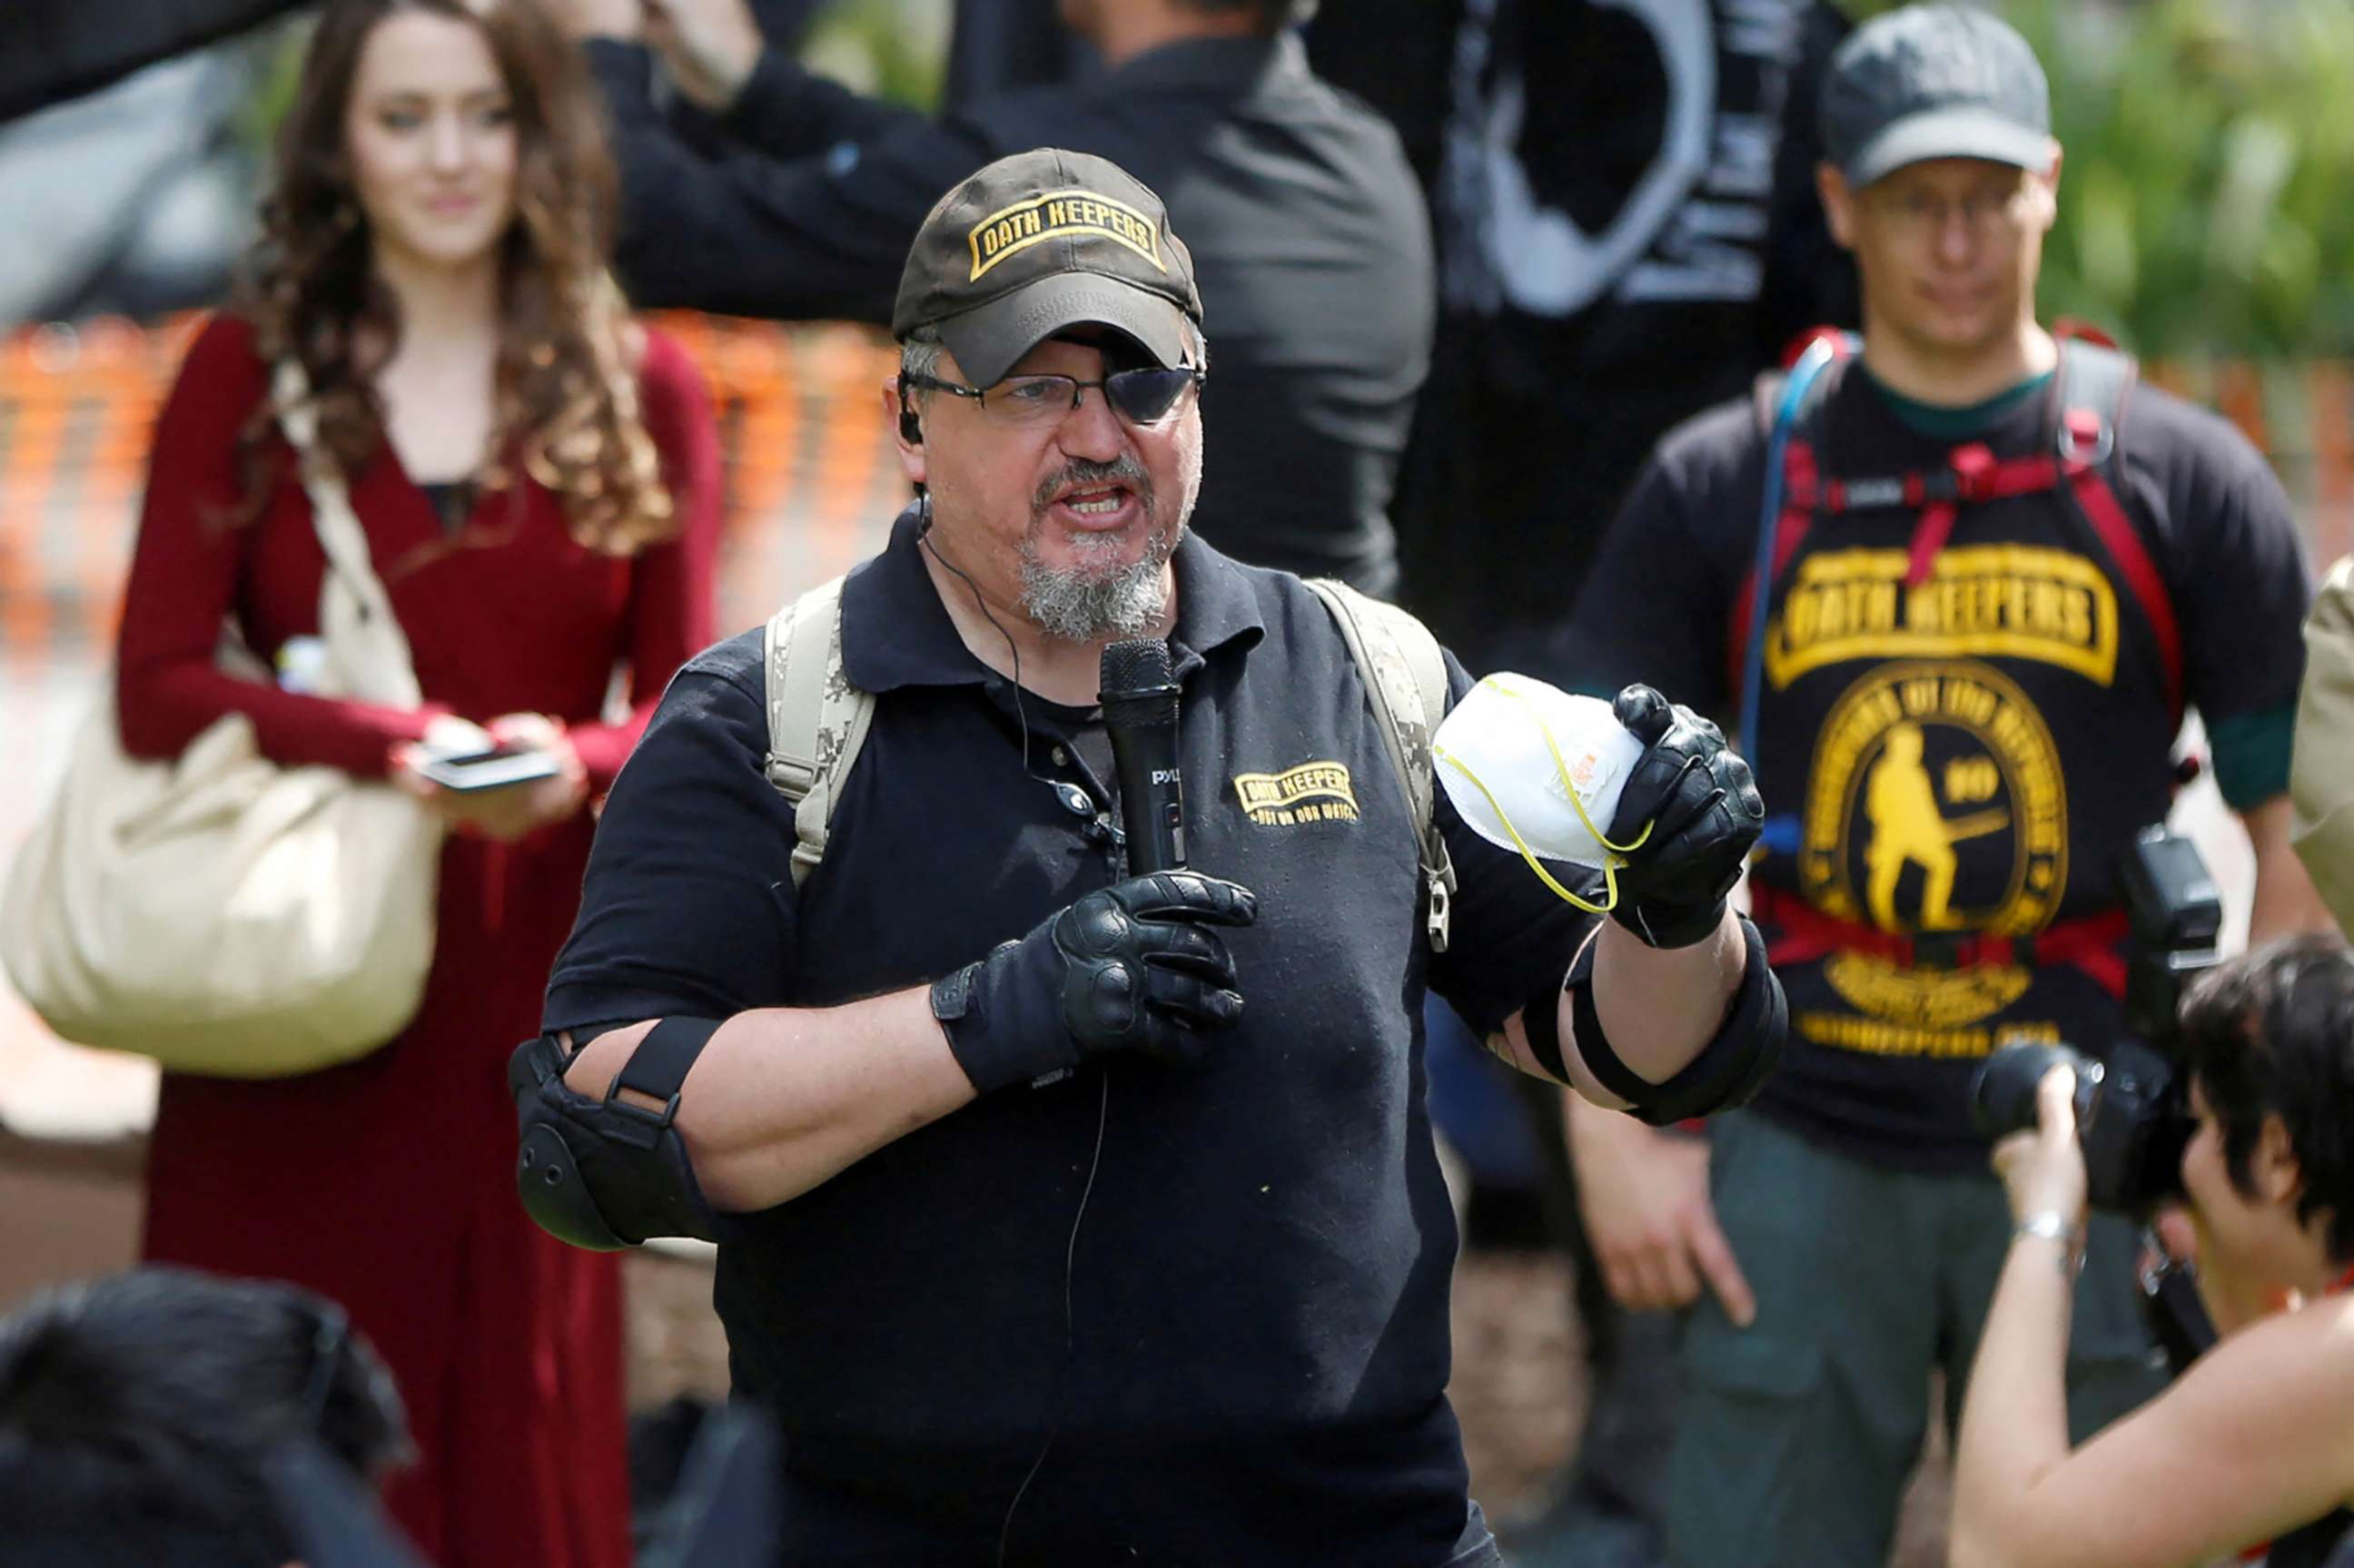 PHOTO: Oath Keepers founder, Stewart Rhodes, speaks during the Patriots Day Free Speech Rally in Berkeley, Calif., April 15, 2017.